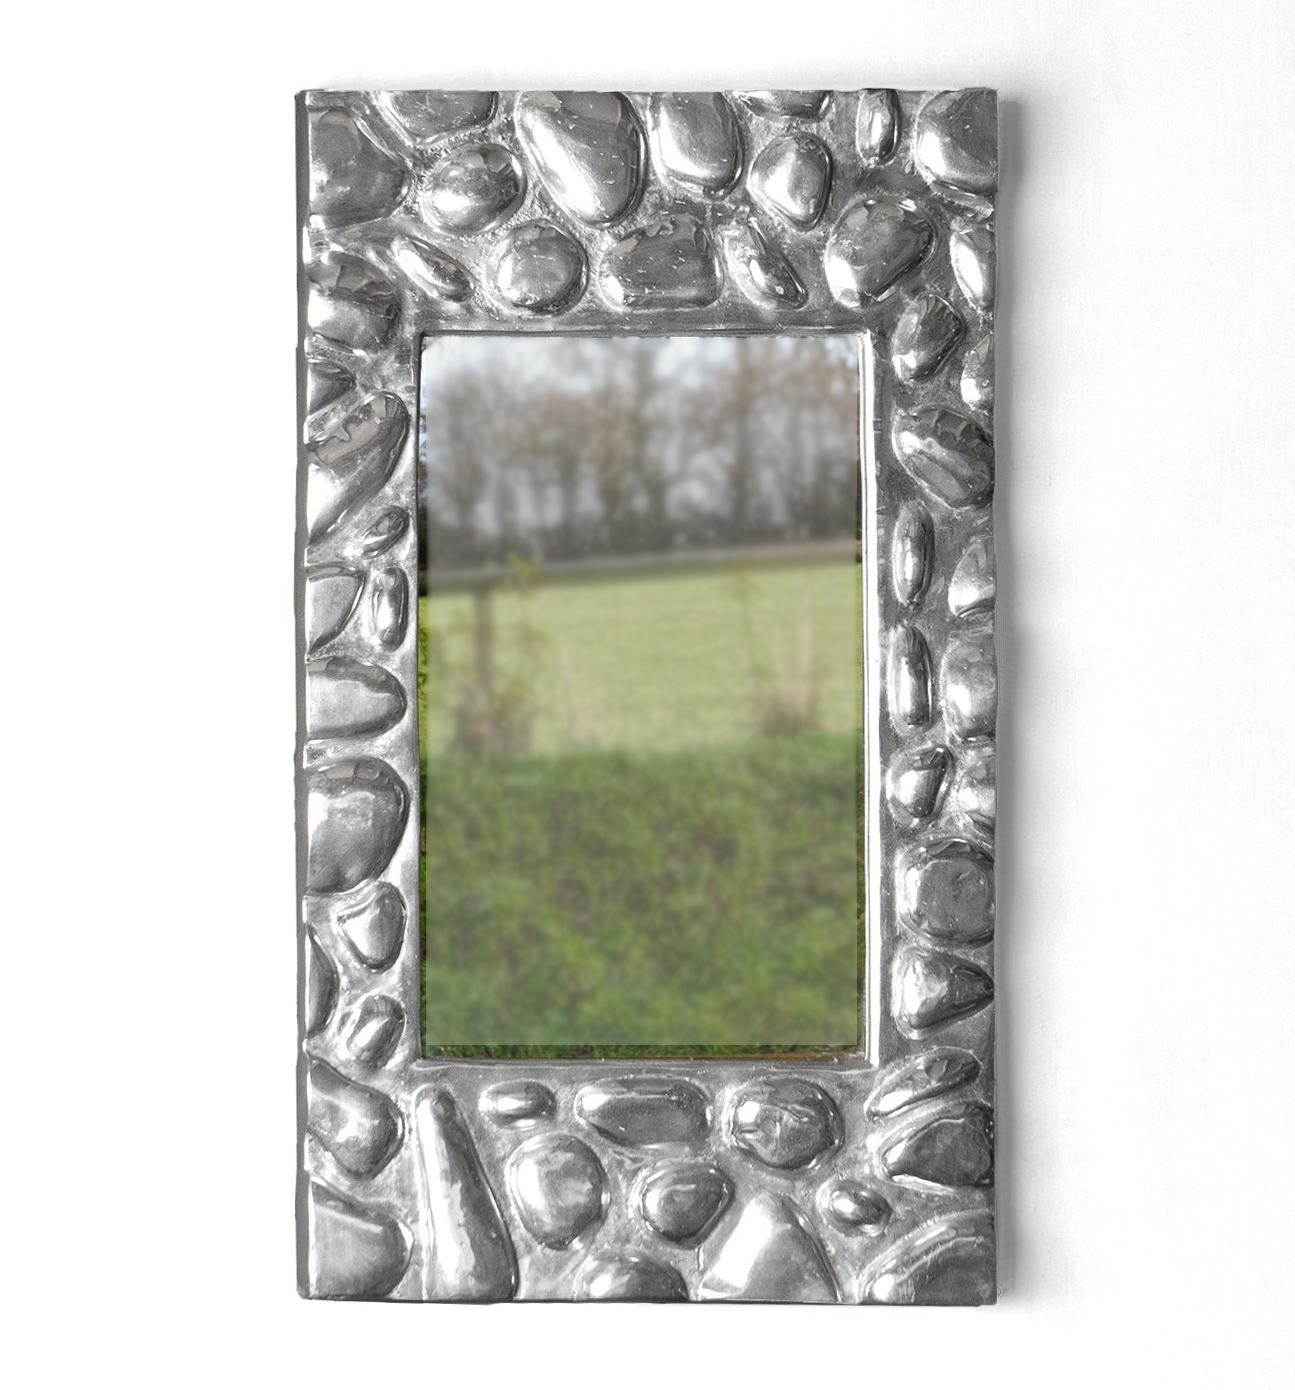 Mid-Century Wall Mirror

Silver frame stylised as pebbles.

Cast from aluminium.

Paper label verso titles the piece ‘Brighton Beach’.

It is in very good vintage condition with wear commensurate with age.

Measuring 67cm high x 39cm wide x 5cm deep.